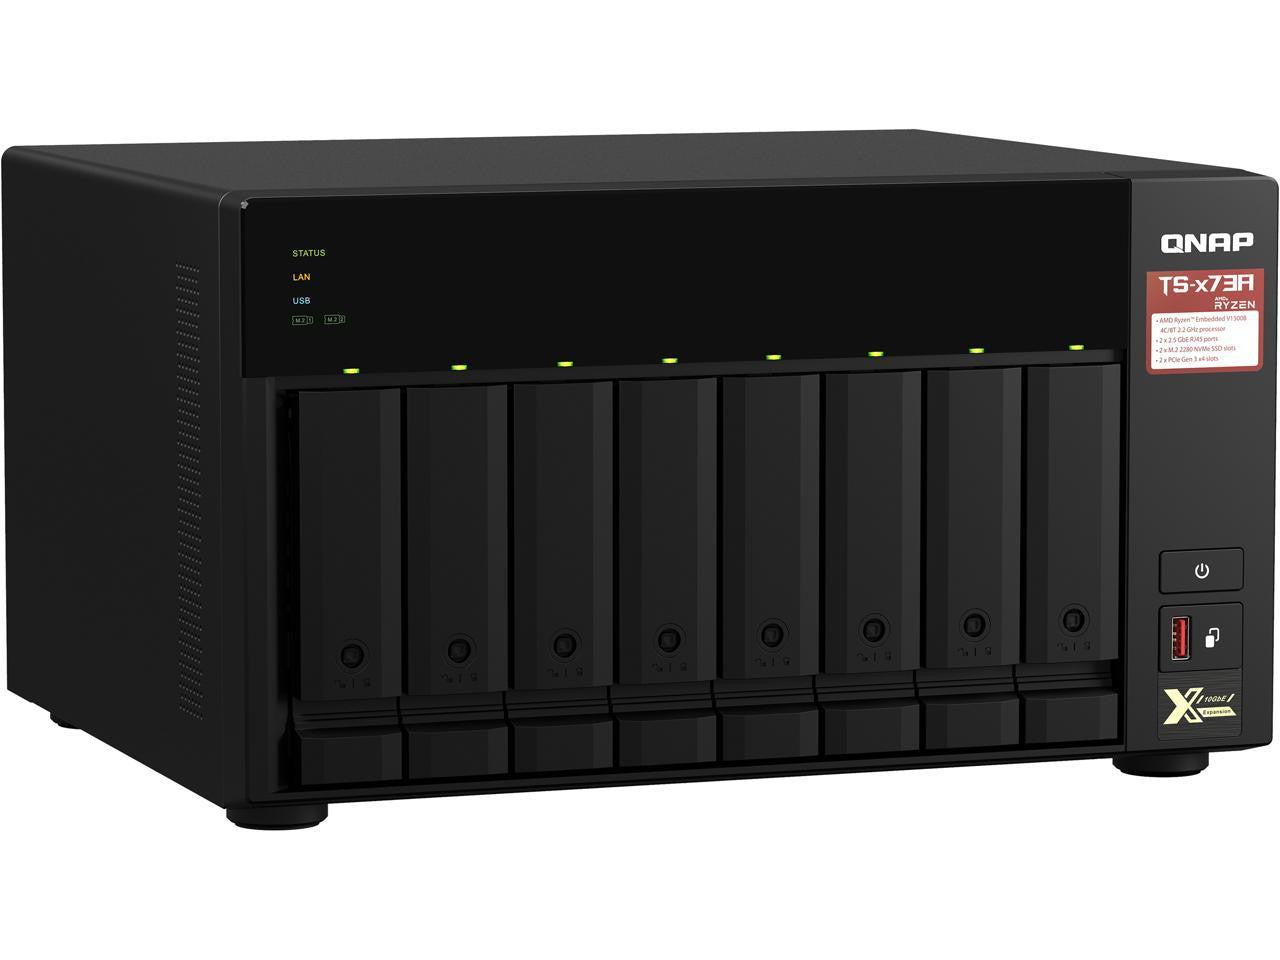 QNAP TS-873A 8-BAY NAS with 8GB DDR4 RAM and 96TB (8x12TB) Seagate Ironwolf NAS Drives Fully Assembled and Tested